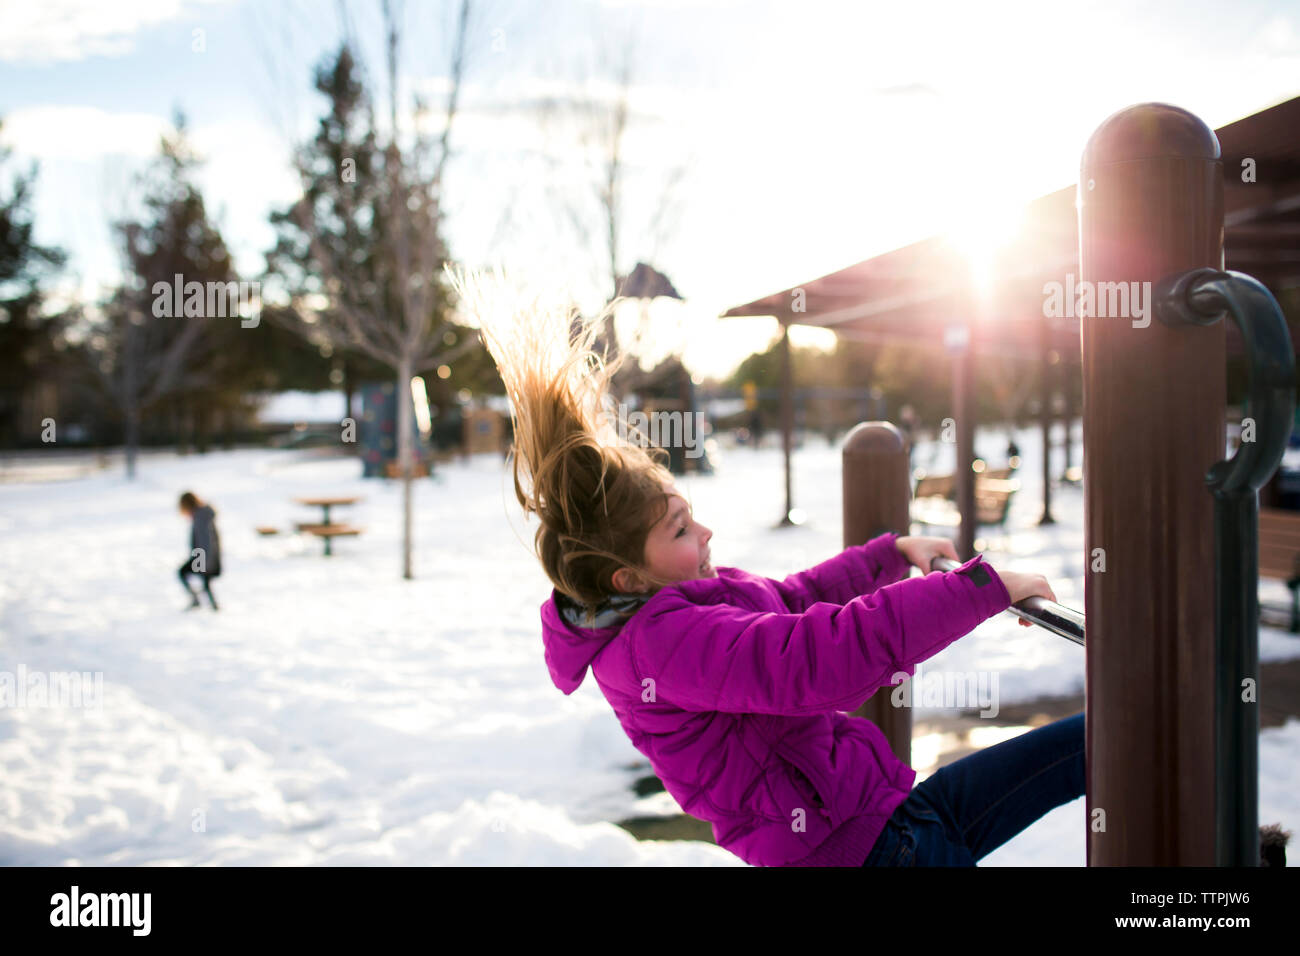 Girl playing on wooden structure at park during winter Stock Photo